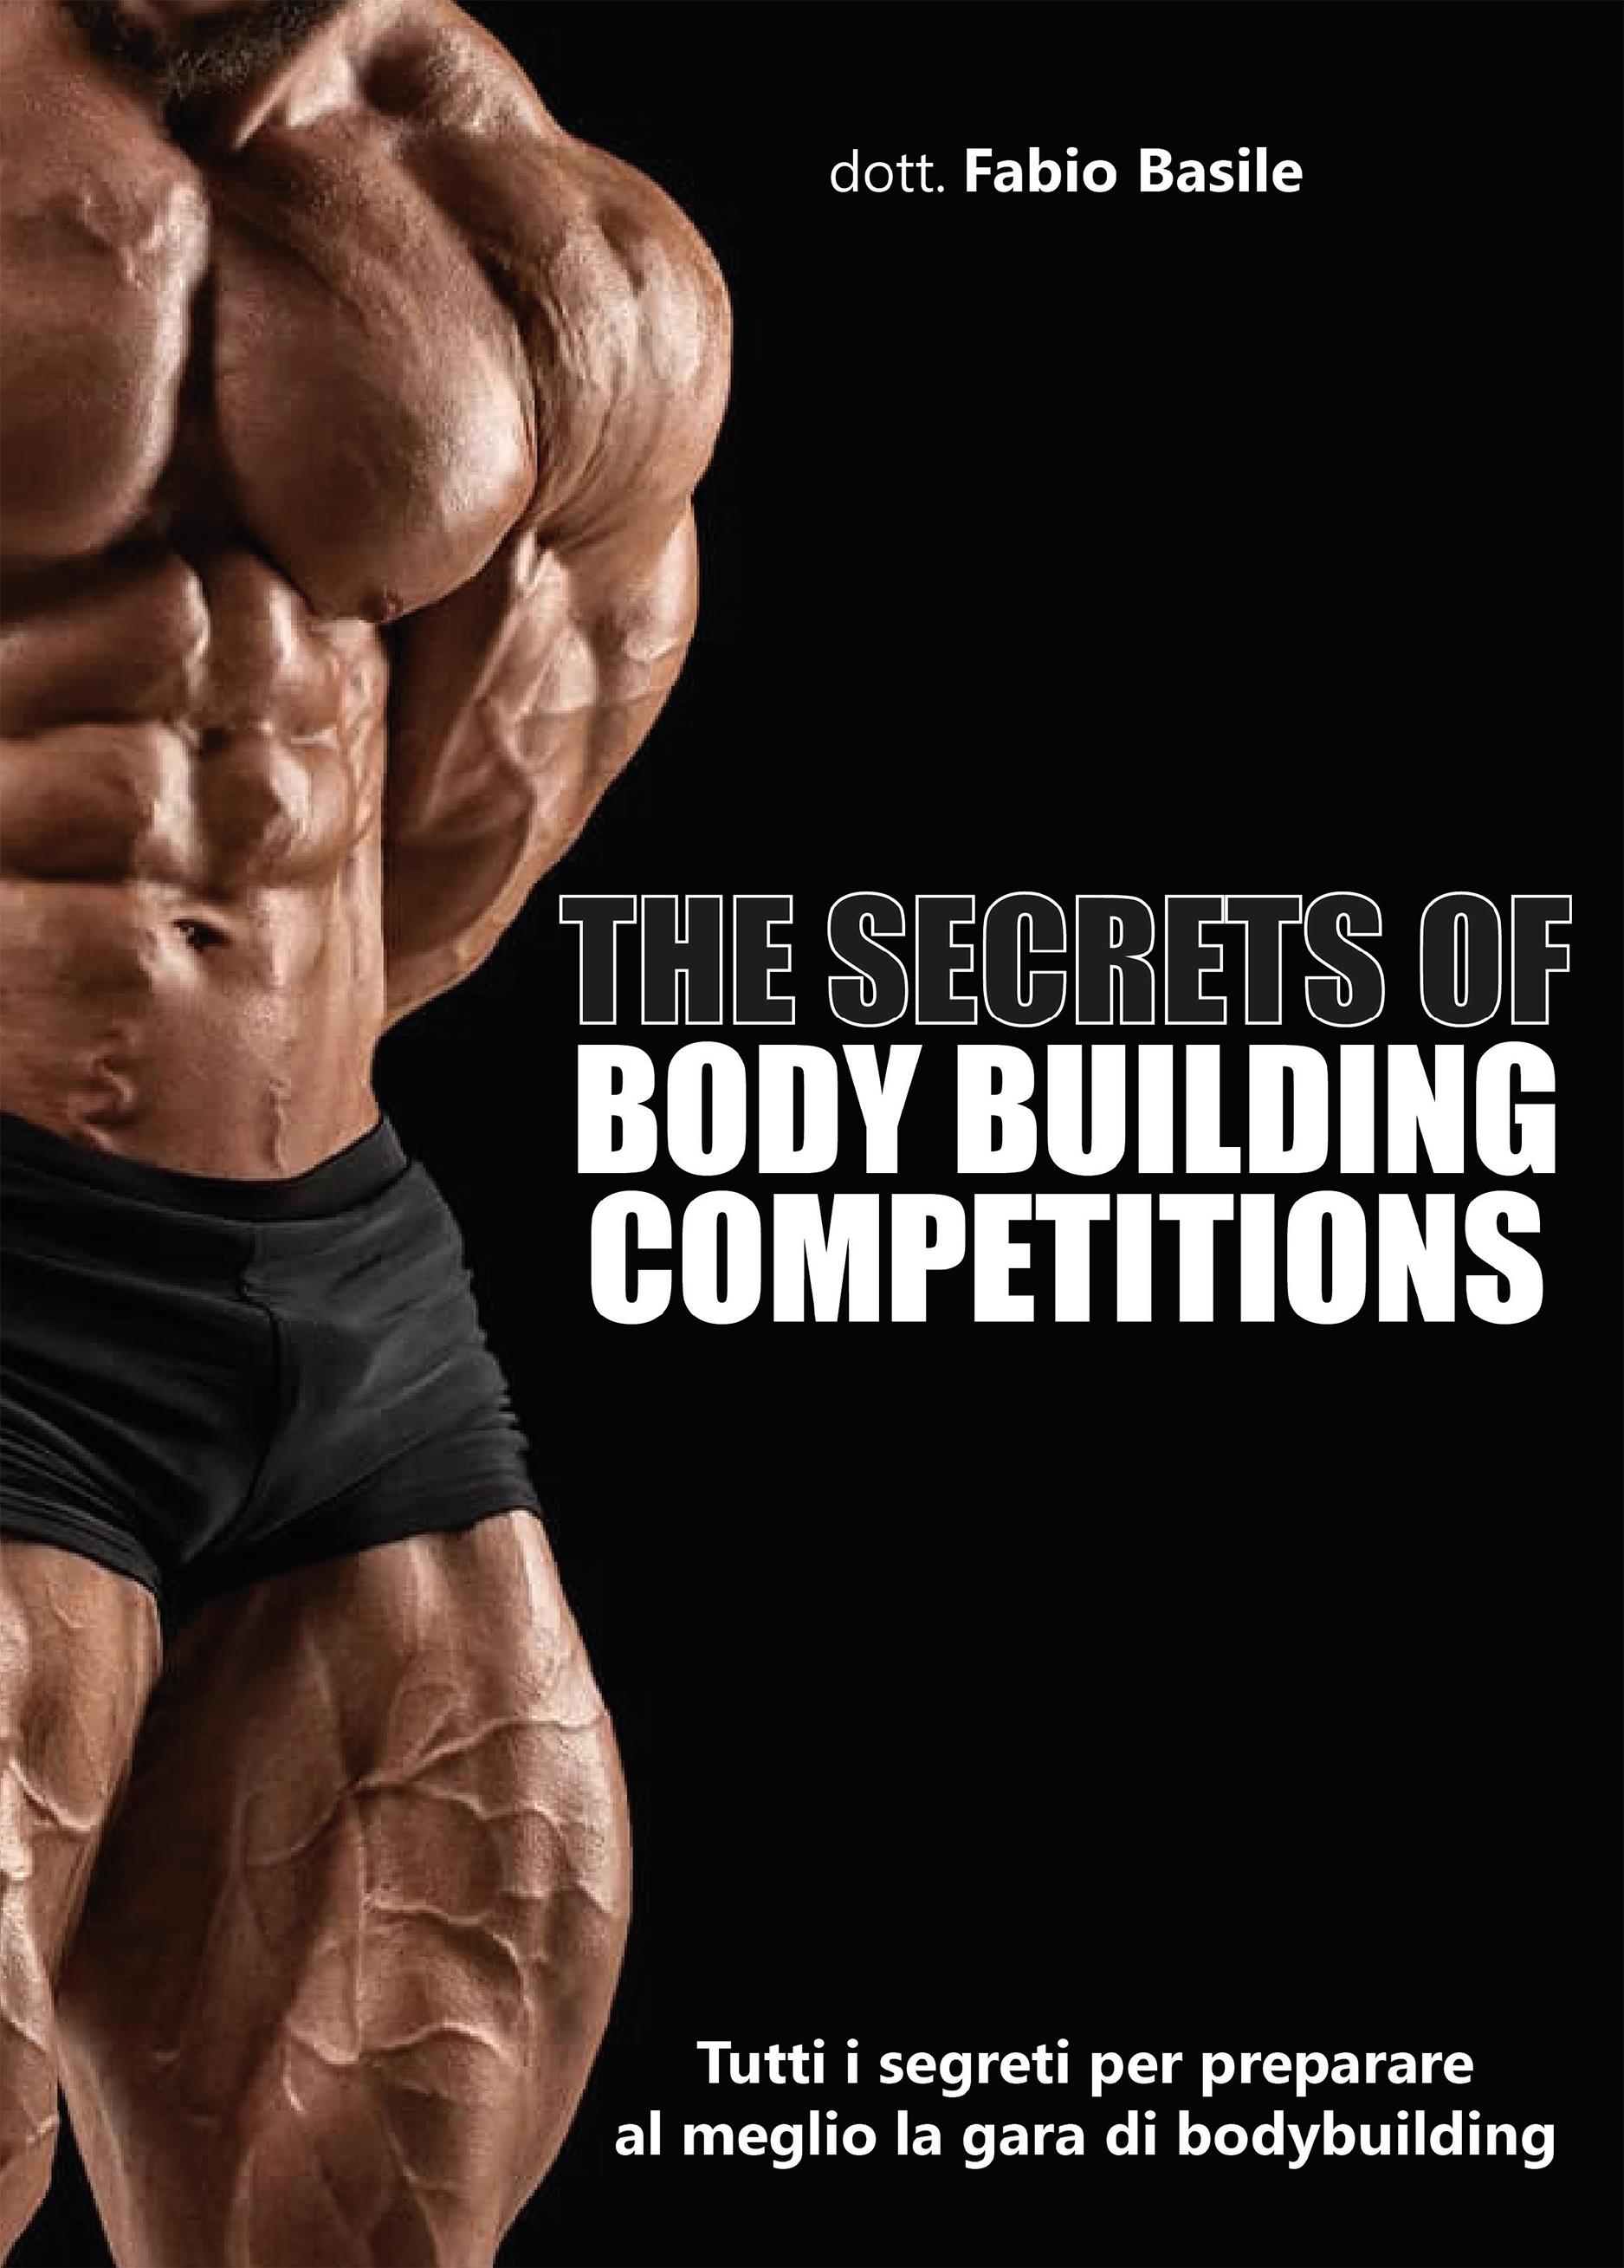 The secrets of body building competitions